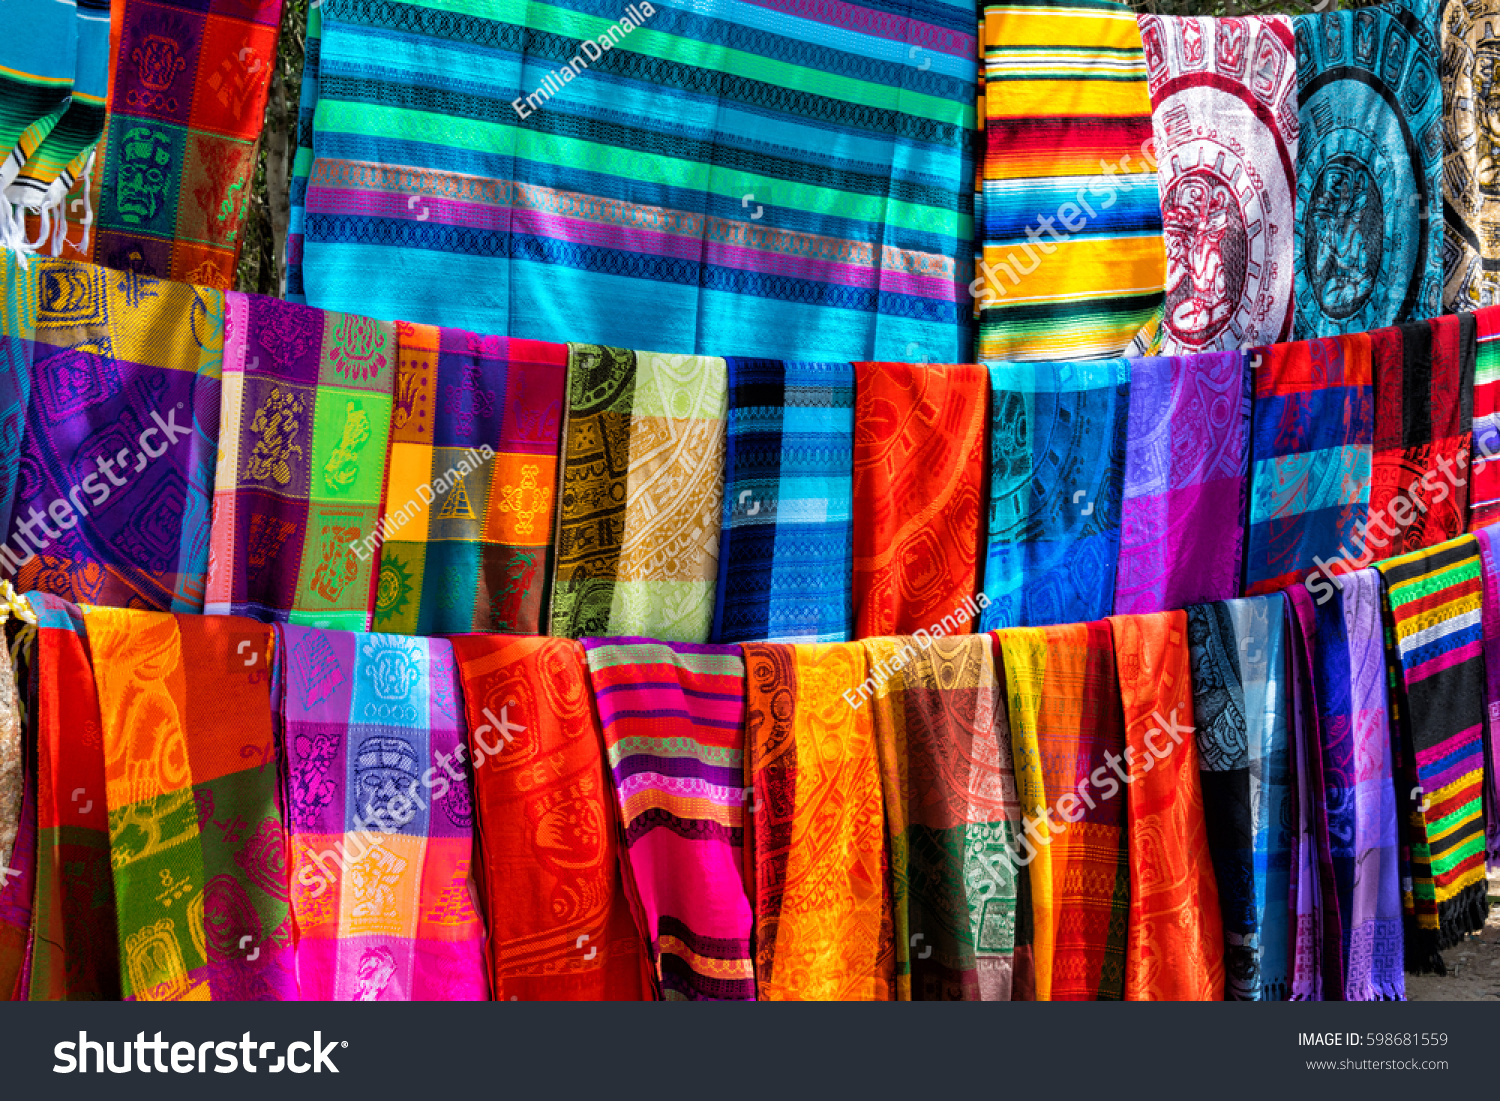 Many multicolored textiles being representative for the latin america culture and sold as souvenirs at chichen itza, yucatan mexico. #598681559